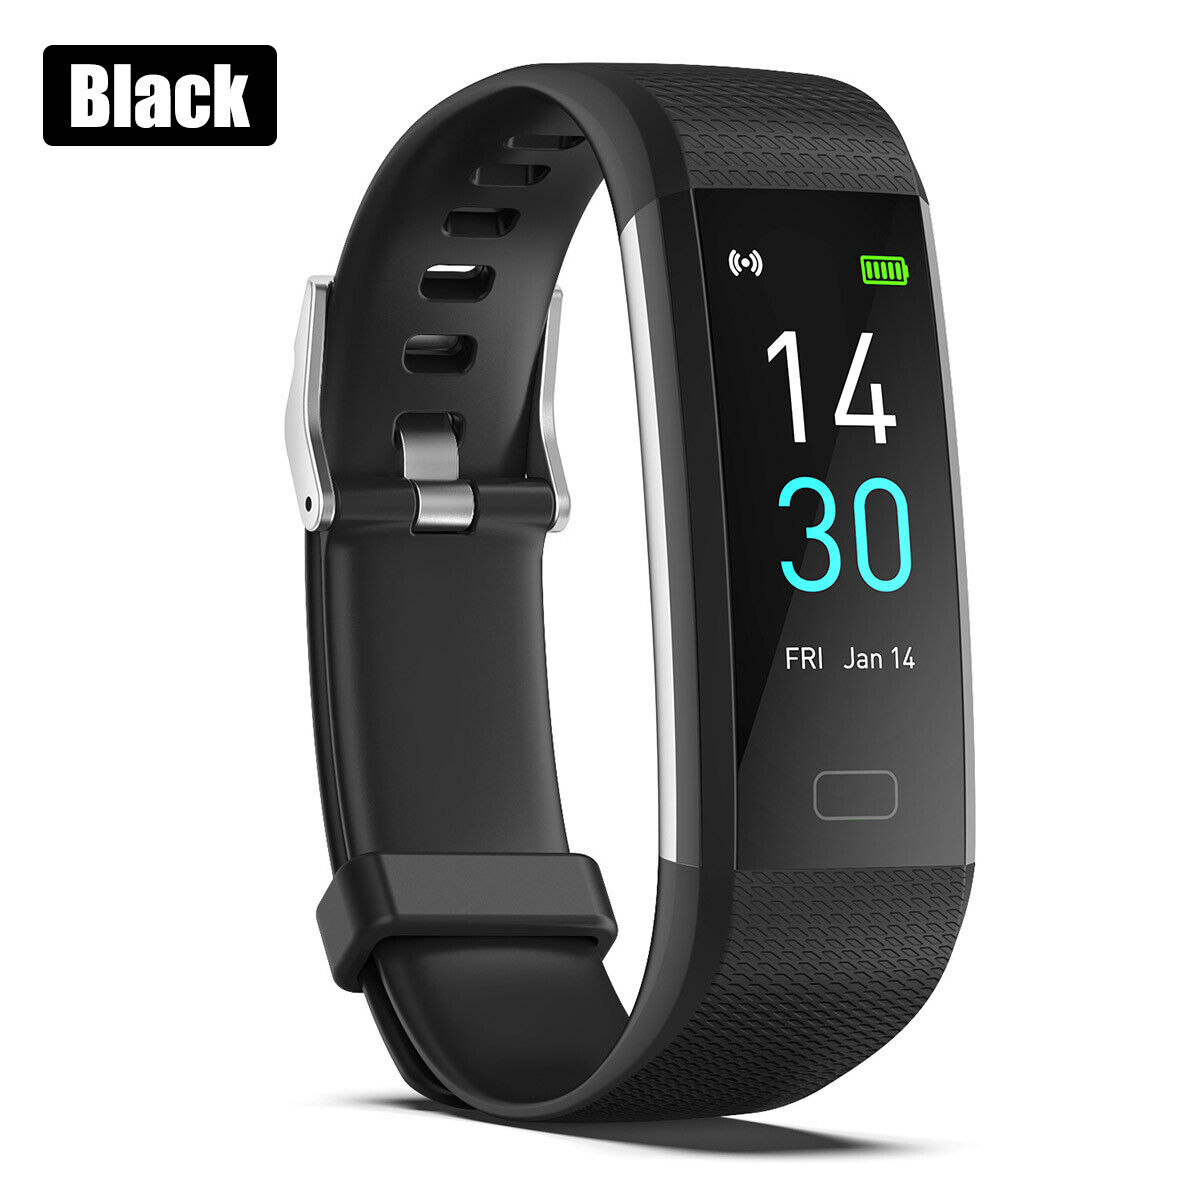 Elliptical Trainer - Smart Watch with ECG & PPG